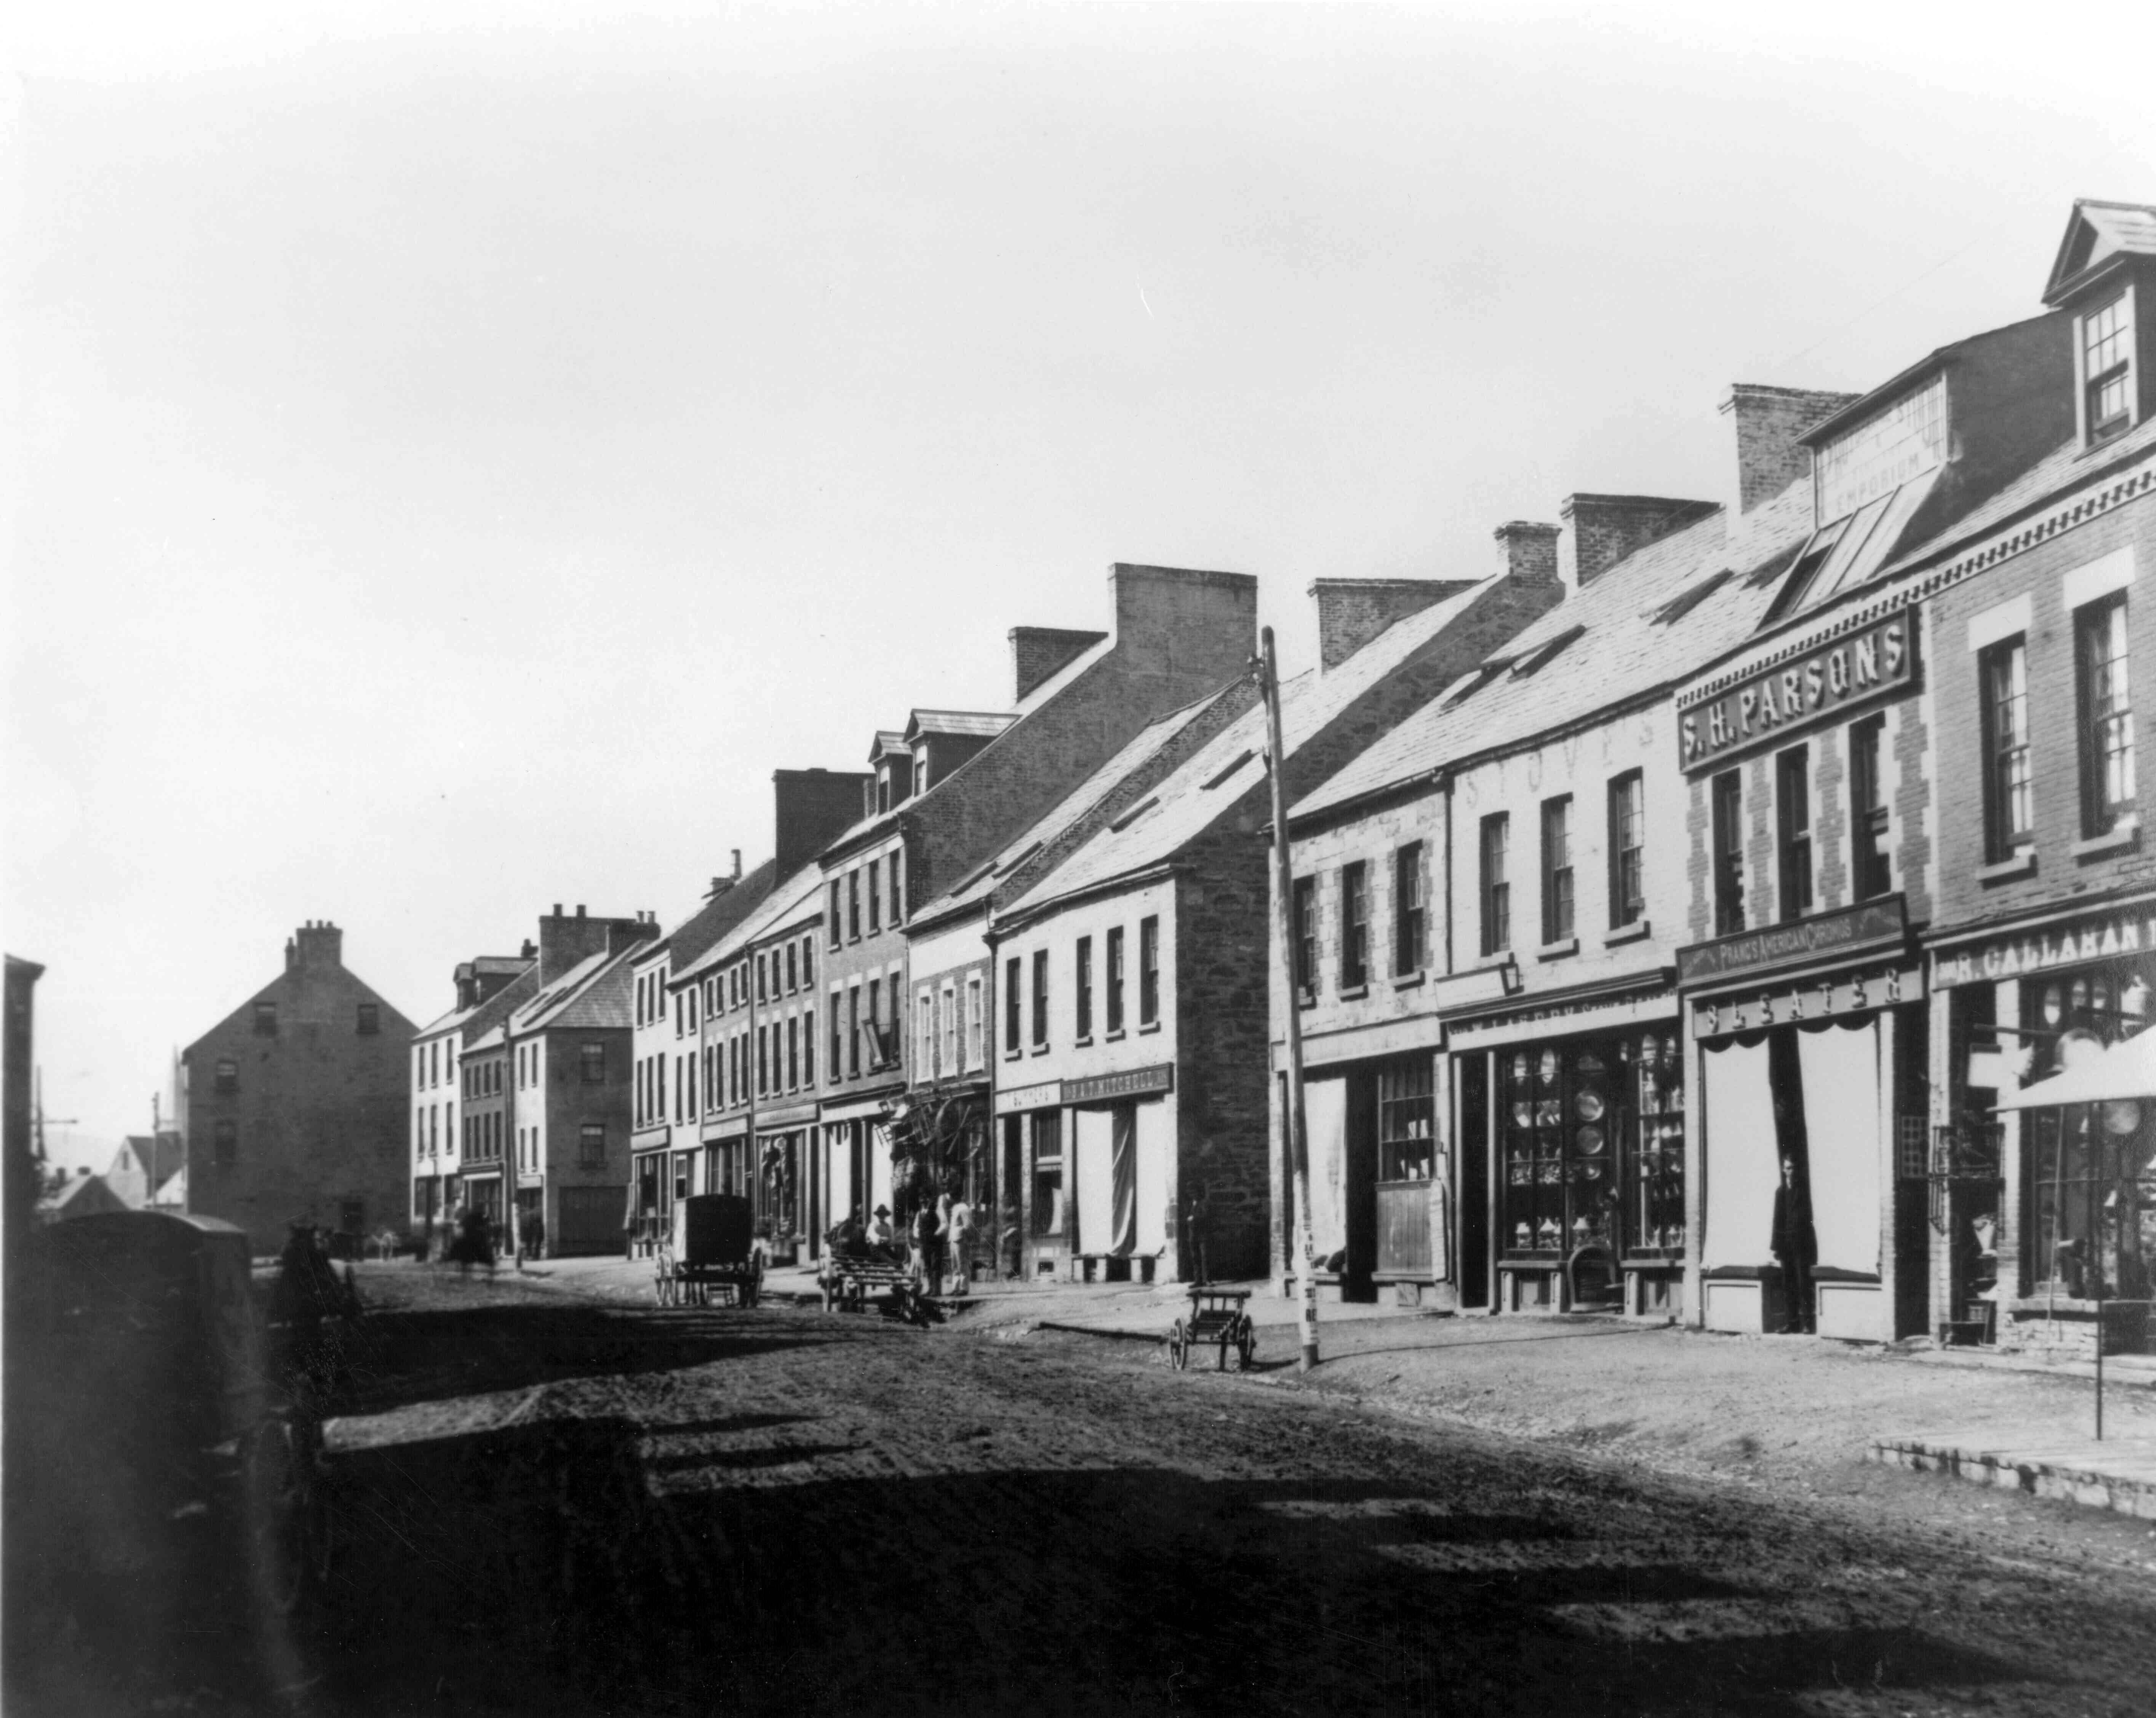 1890's: Water Street looking west showing the premises of R. Callahan, S.H. Parsons, B & T Mitchell, and others